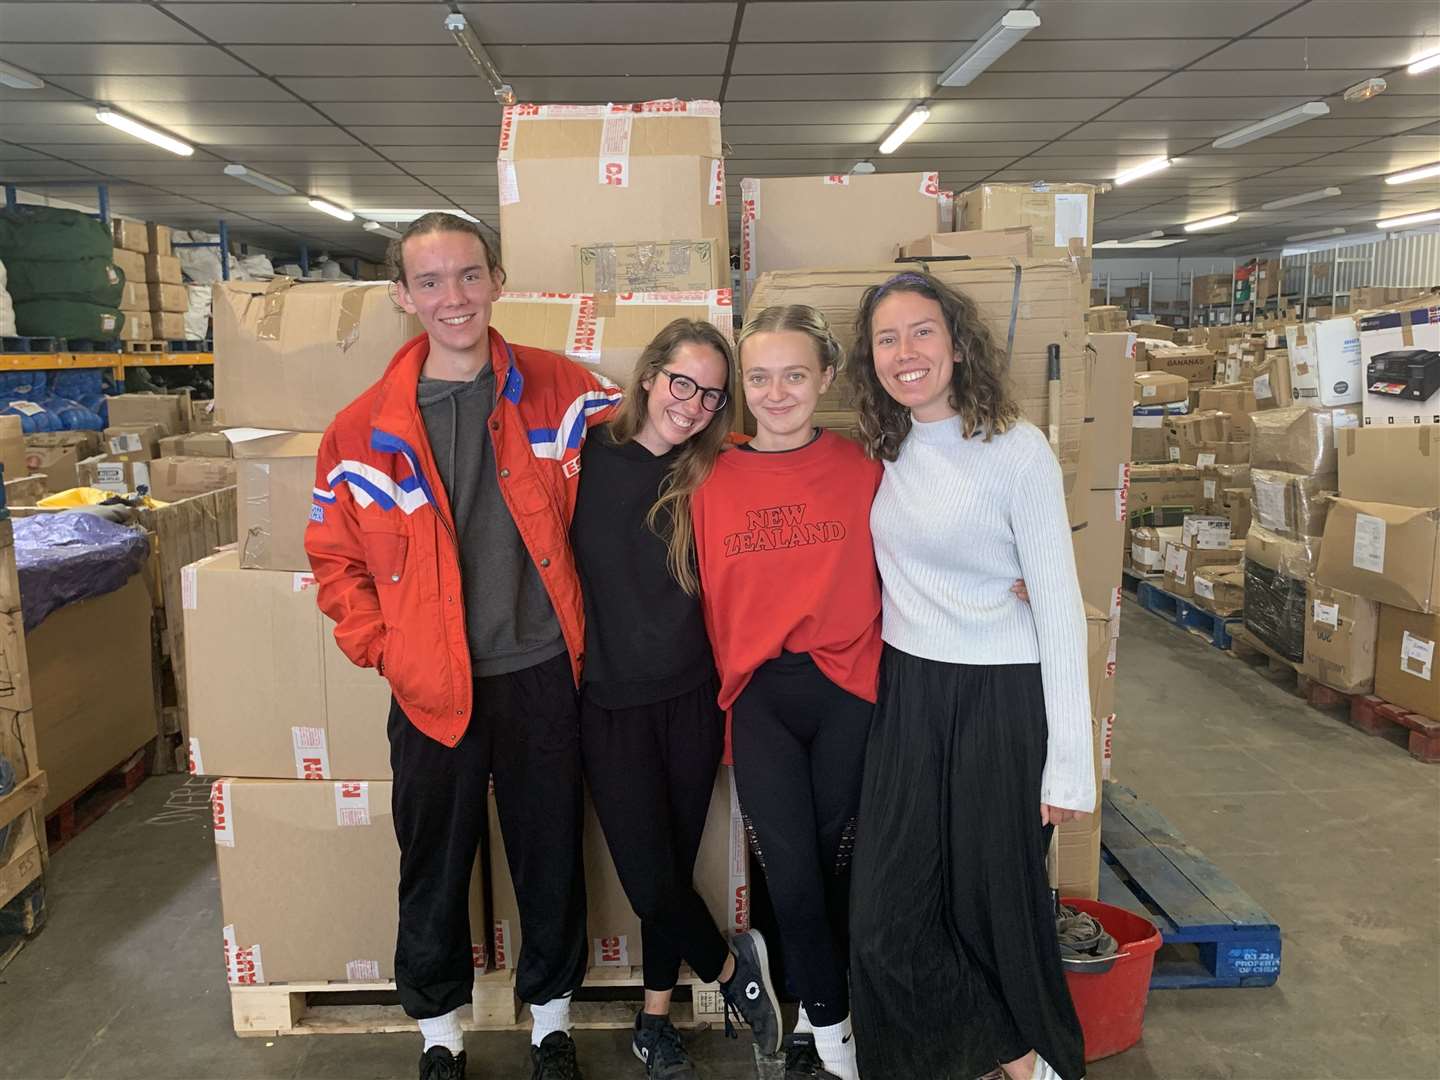 Volunteers Noah Hatchwell, 19, Cara Marsh, 21, Poppy Cleary, 21, and Xanthe Hatchwell, 23, in Calais